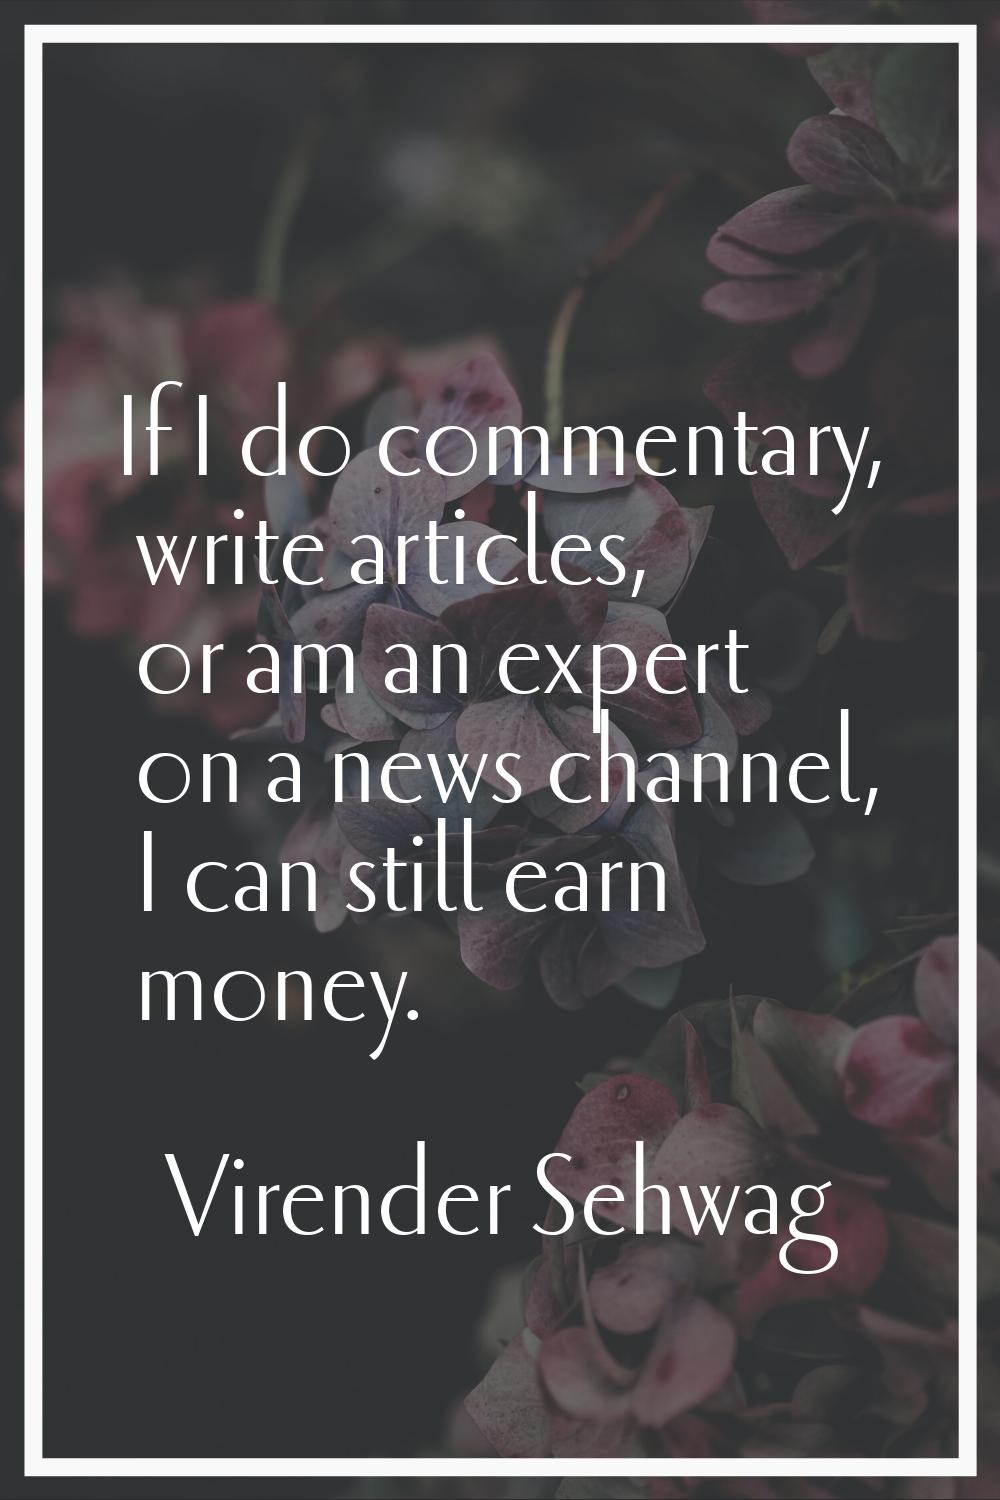 If I do commentary, write articles, or am an expert on a news channel, I can still earn money.